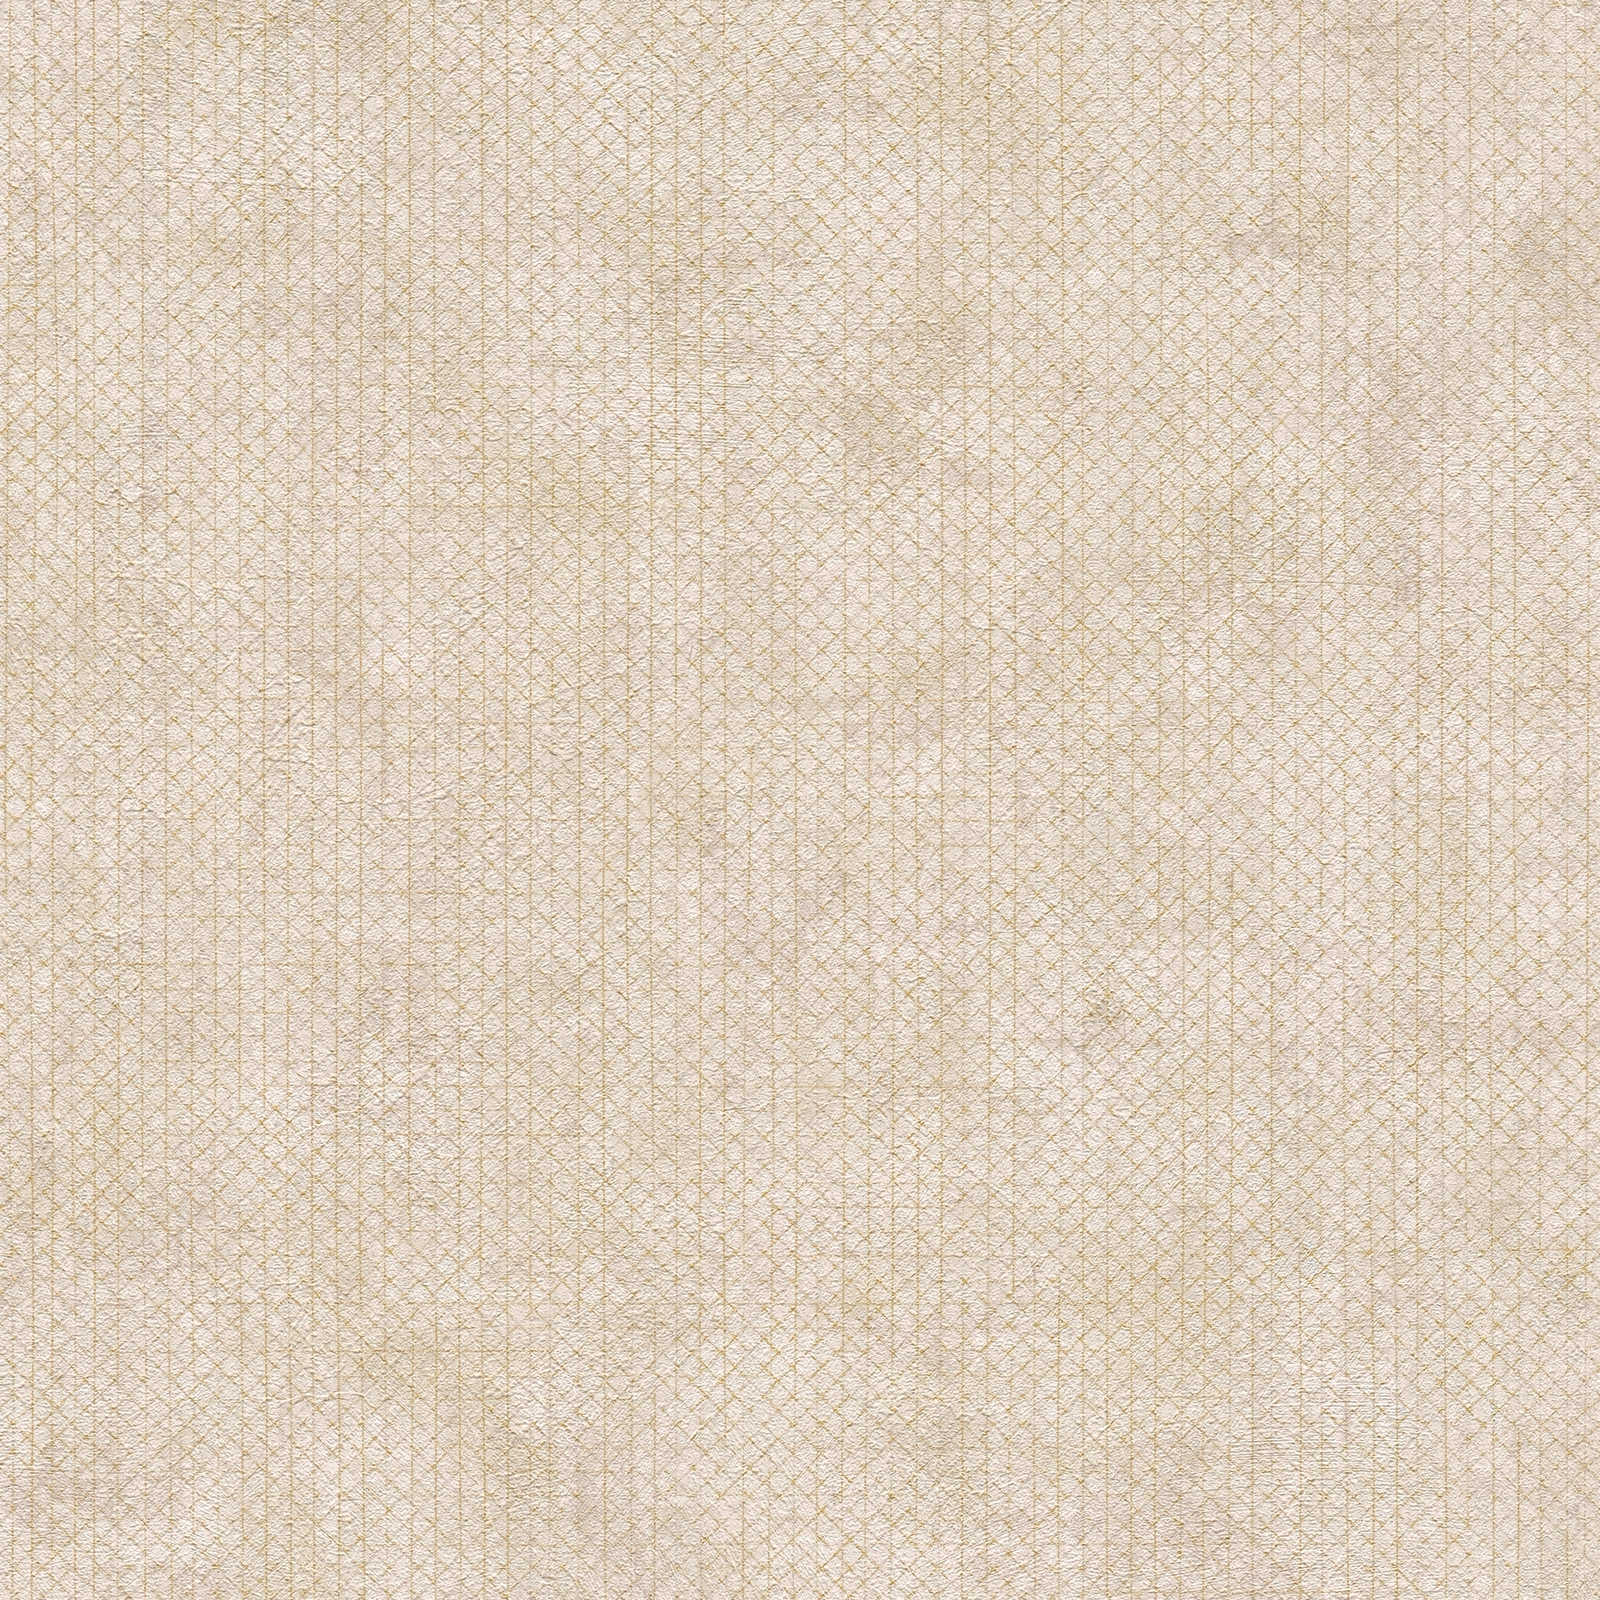 The Bos - Mottled Metallic Lines bold wallpaper AS Creation Roll Beige  388262